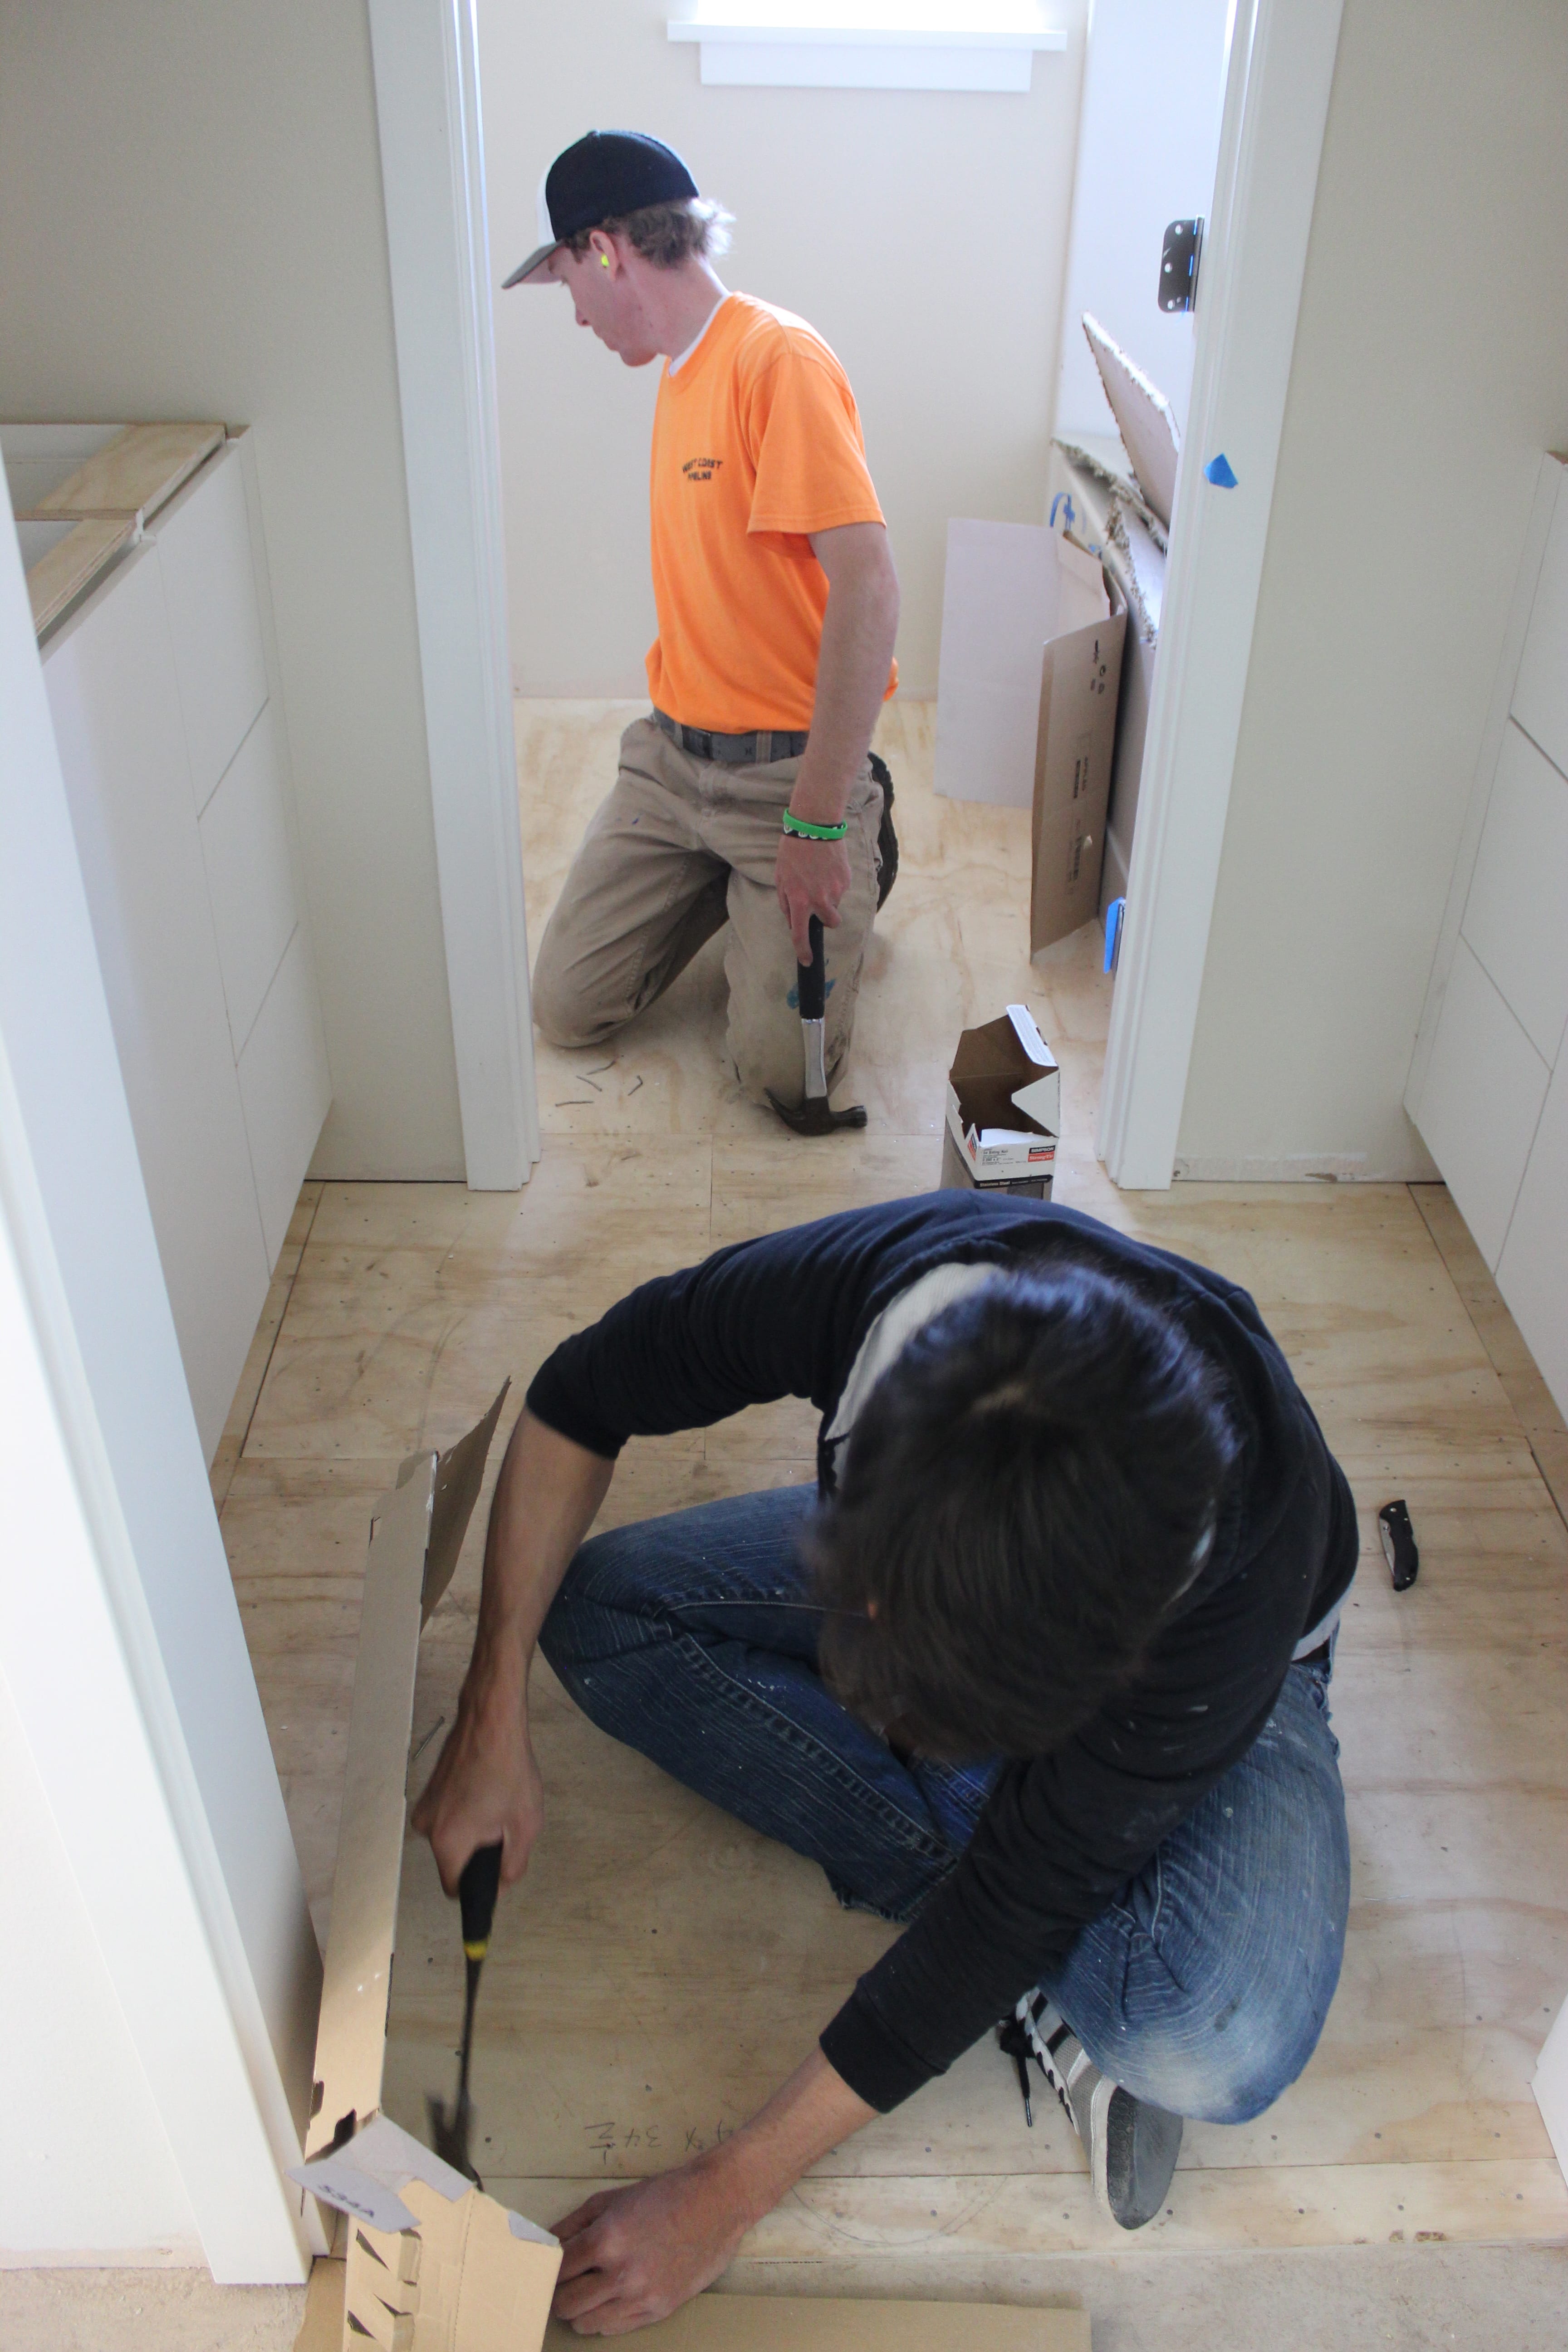 Nailing the plywood in the bathroom